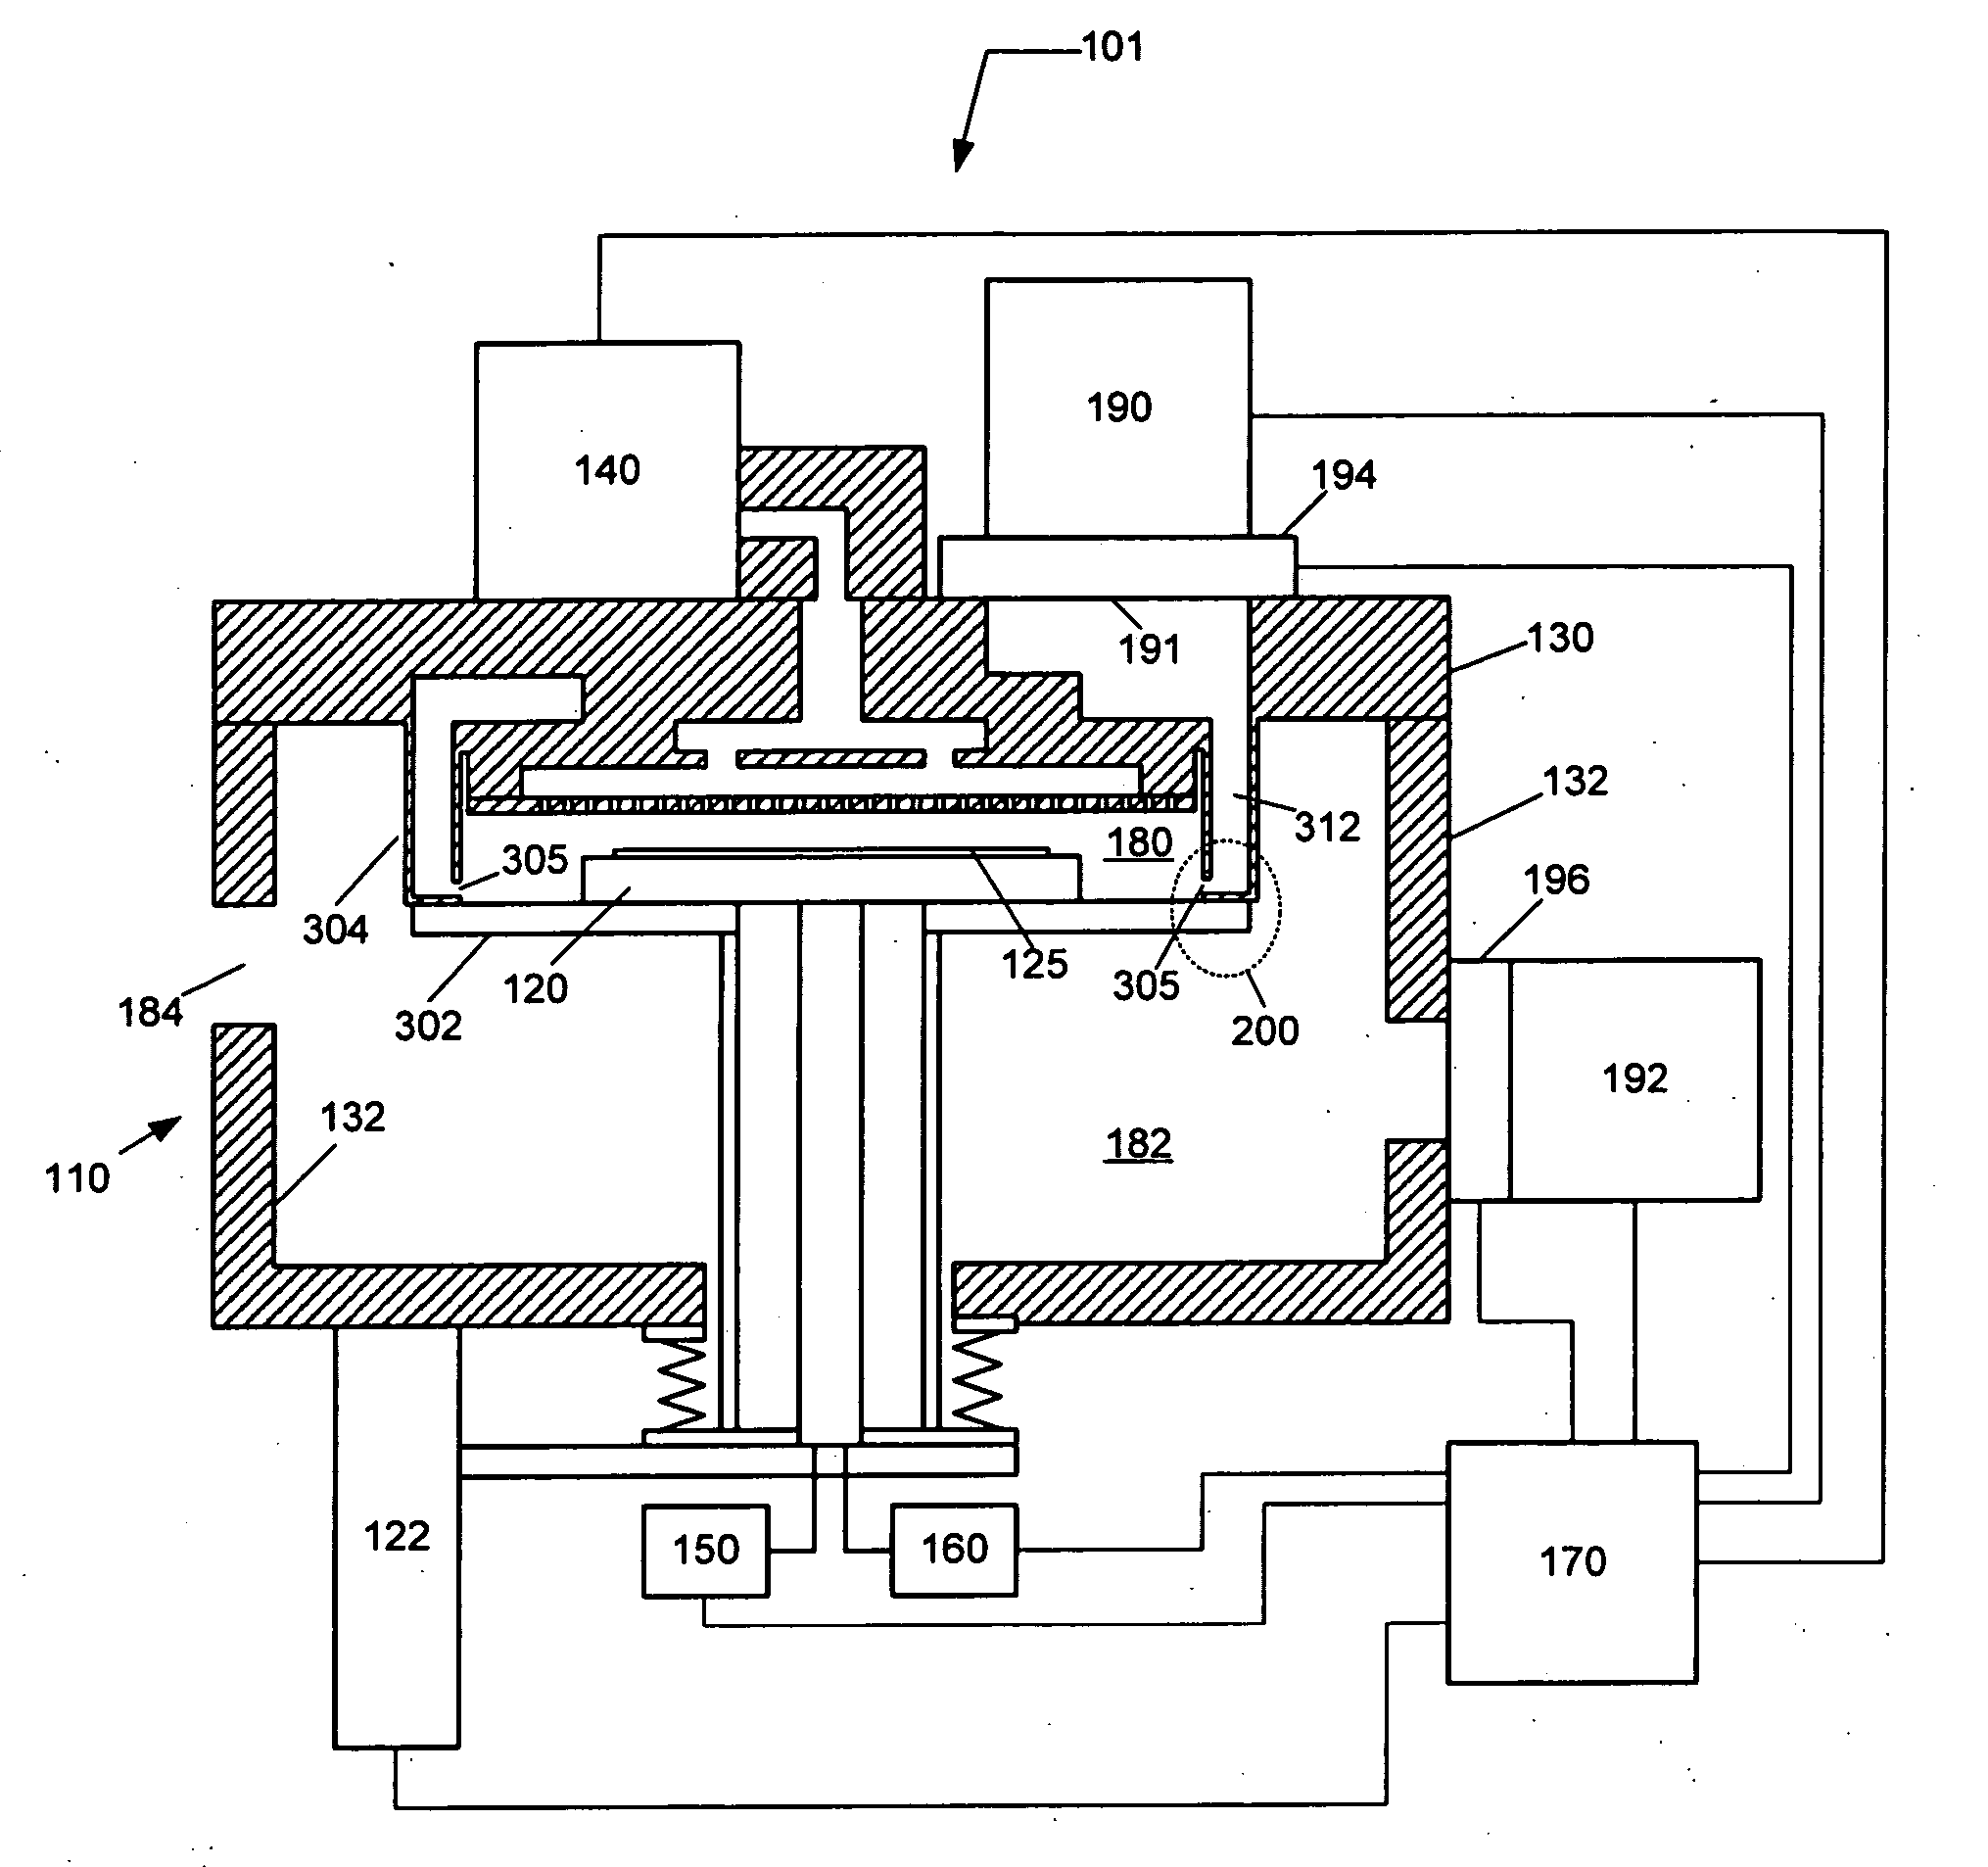 Sealing device and method for a processing system